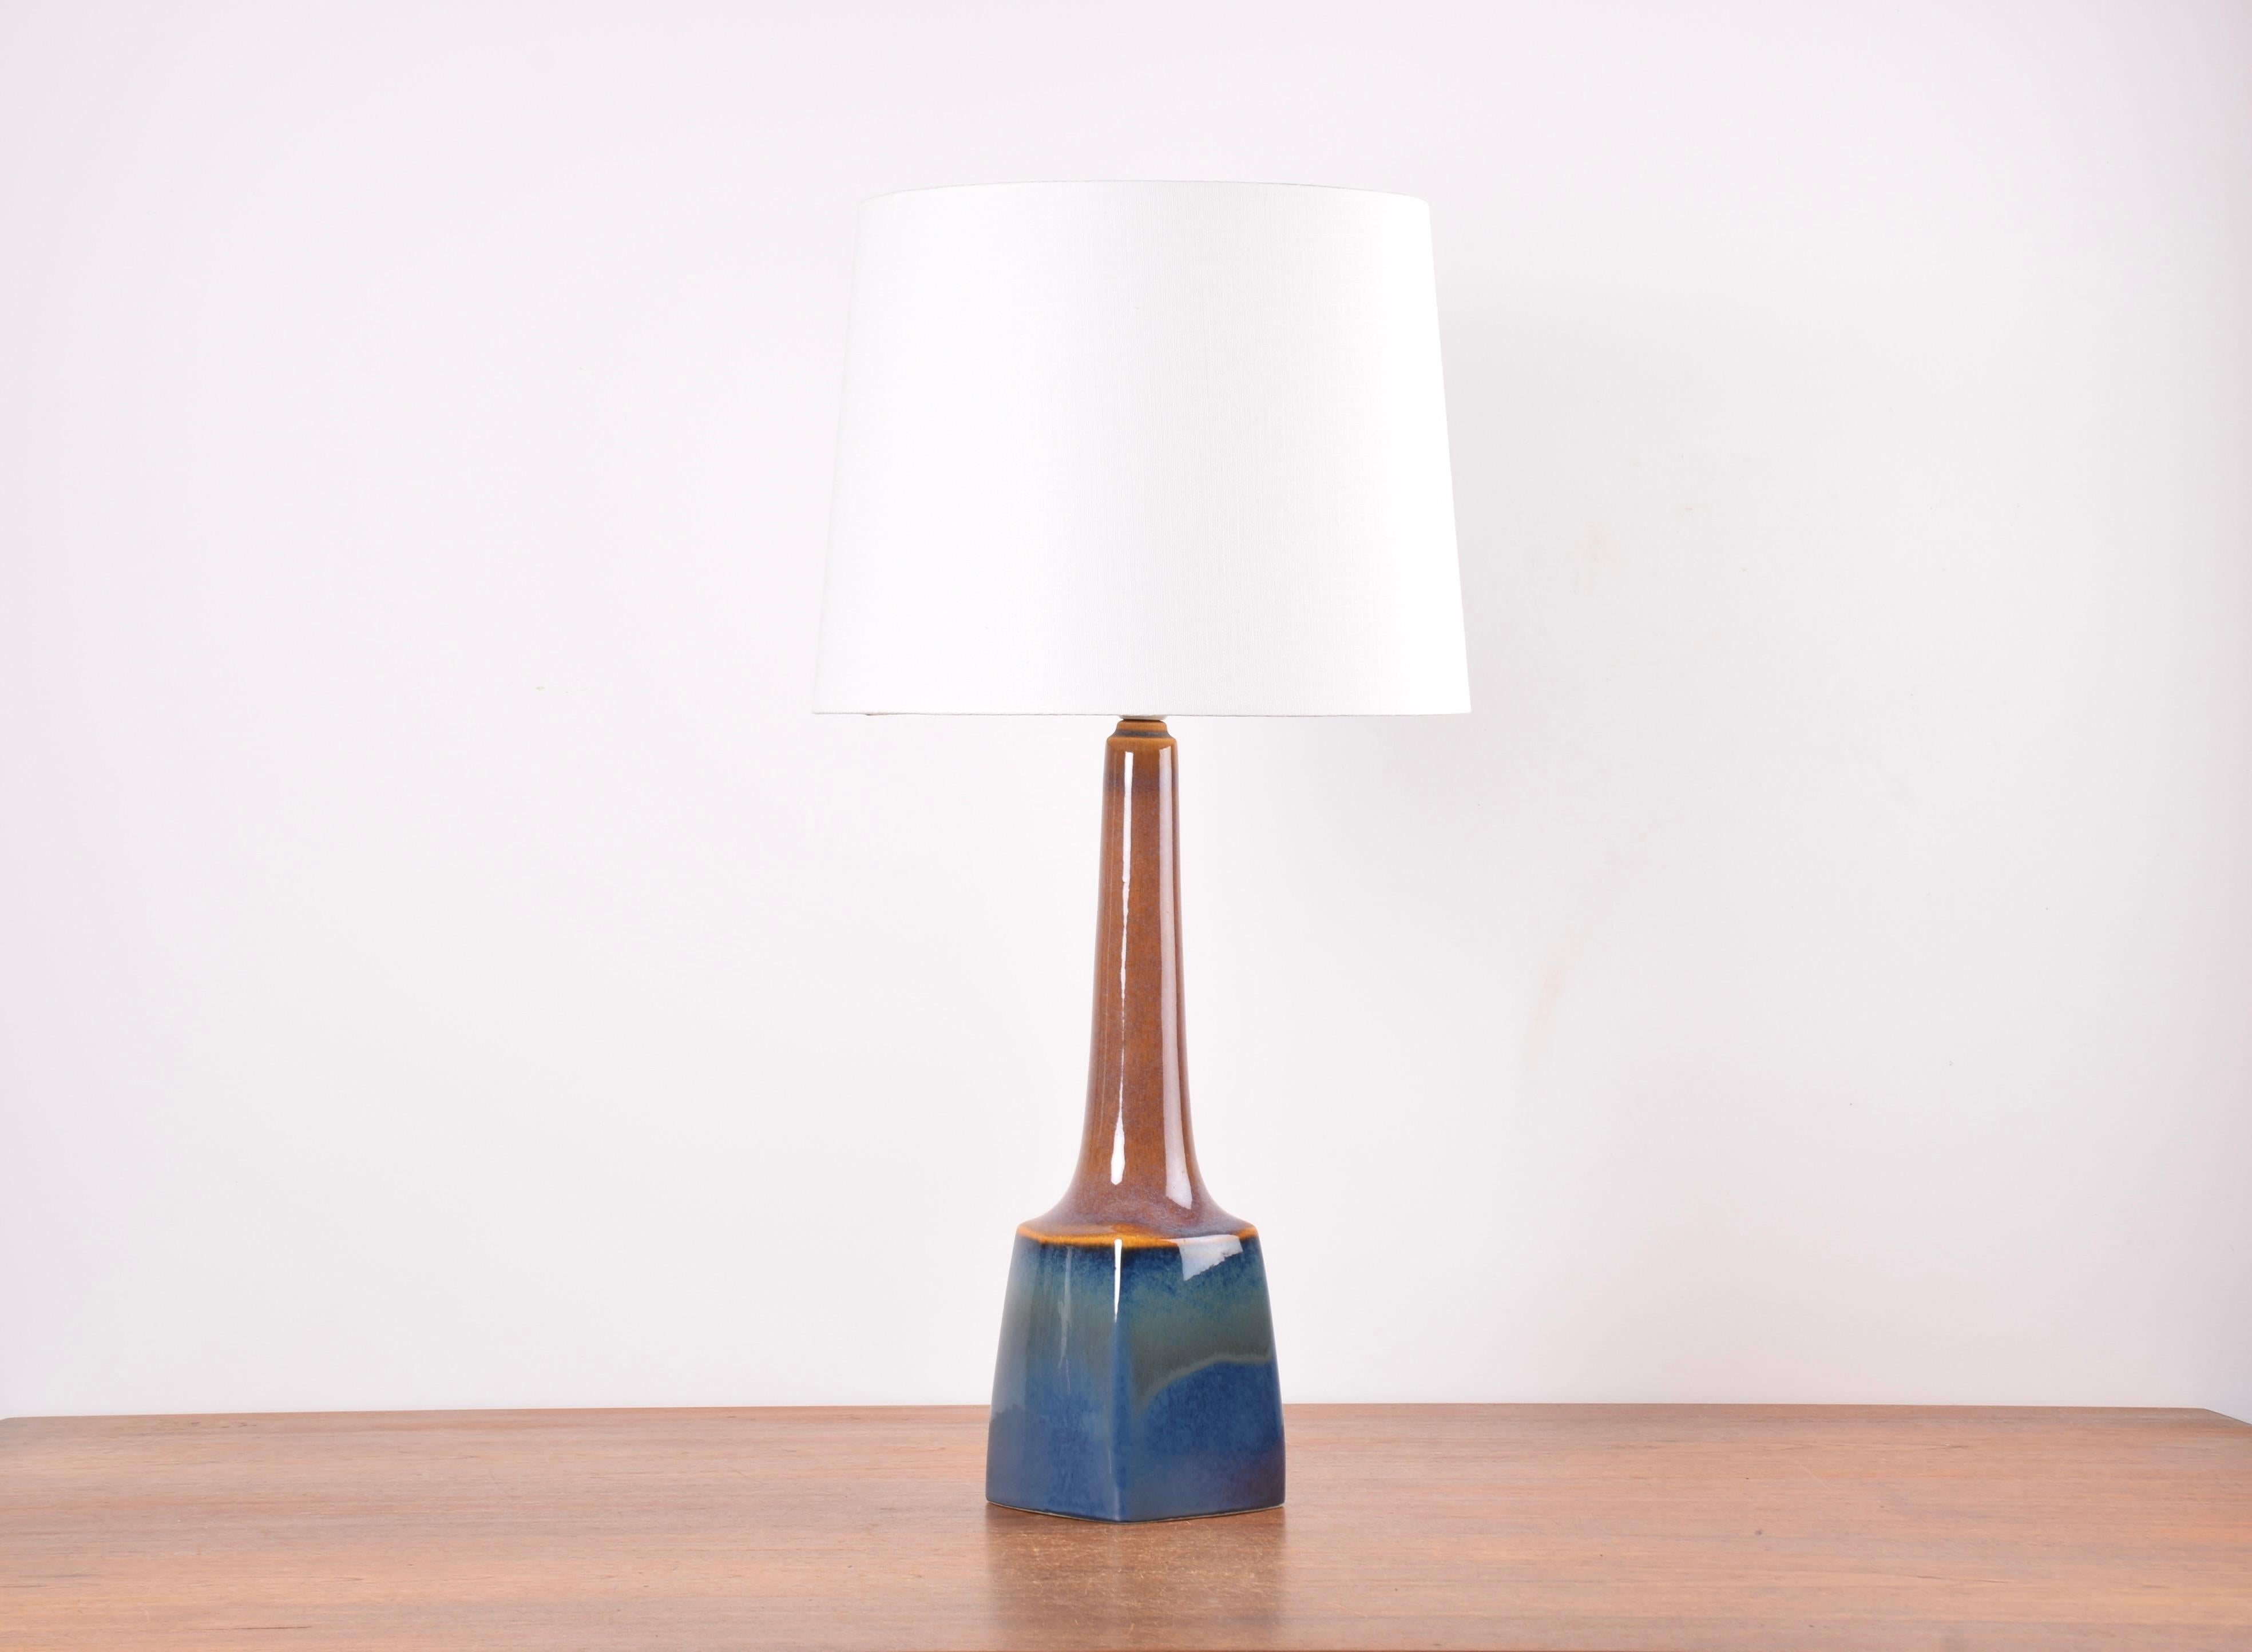 Tall ceramic table lamp from Søholm Stentøj, Denmark.
Made circa 1960s.

Beautiful shift in glaze colors from caramel brown over purple to blue.

Included is a new lamp shade designed and made in Denmark. It is made of woven fabric with some texture